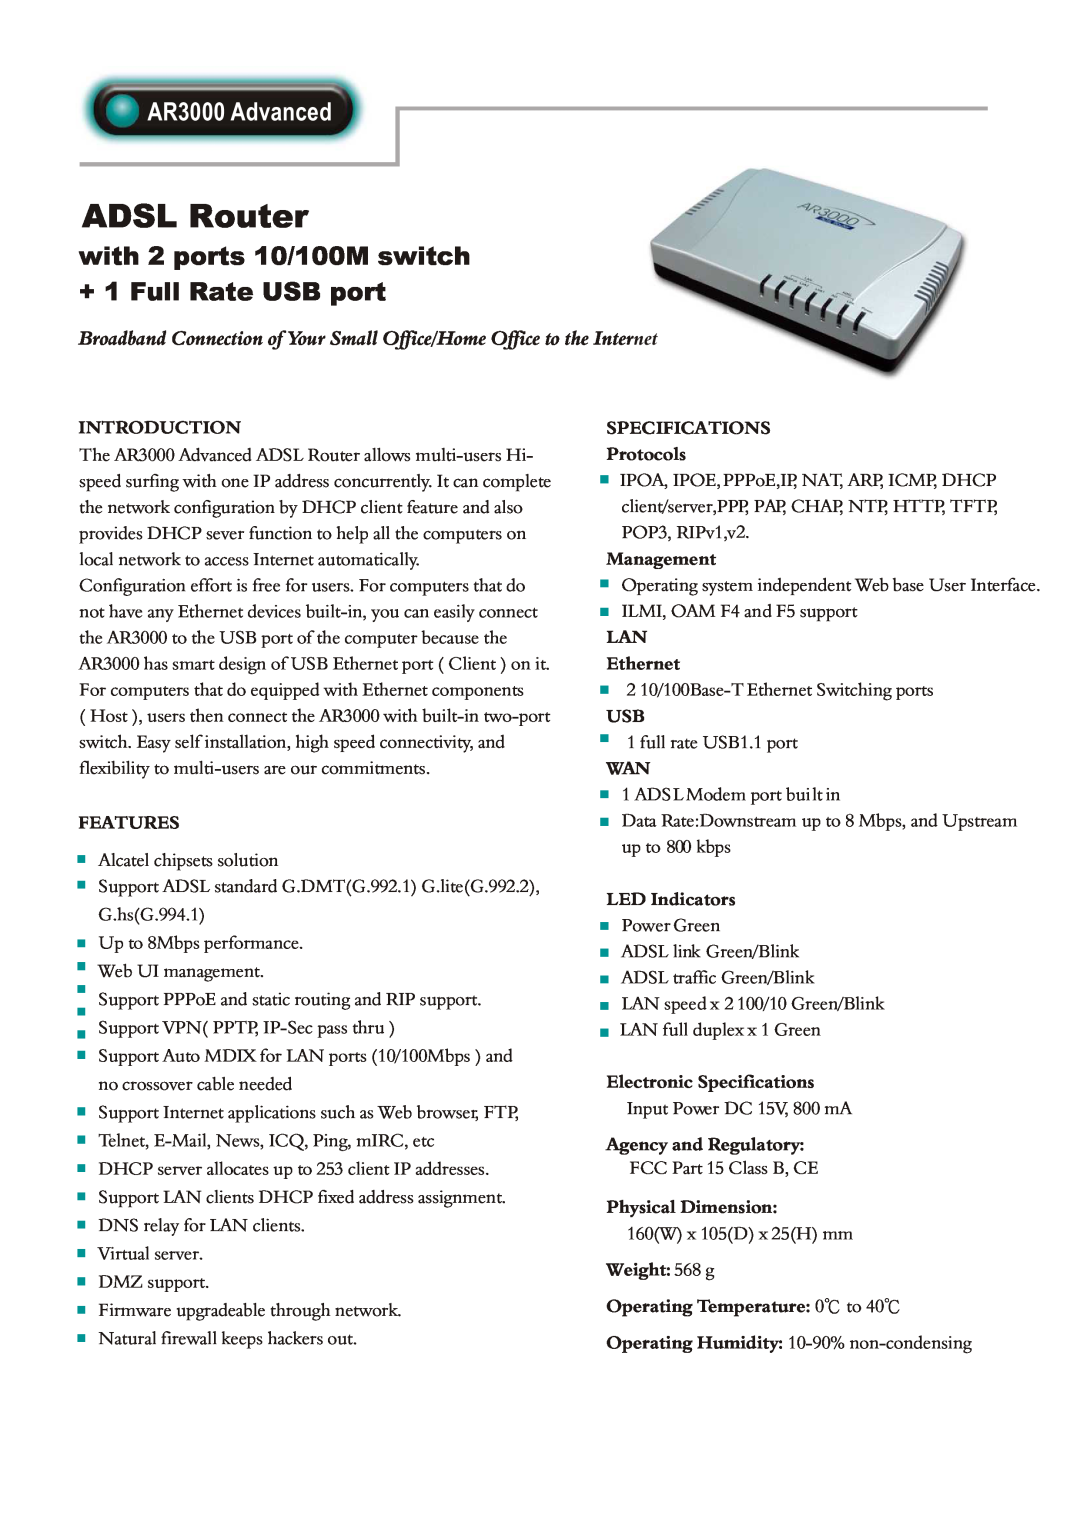 Abocom specifications ADSL Router, AR3000 Advanced, with 2 ports 10/100M switch + 1 Full Rate USB port 